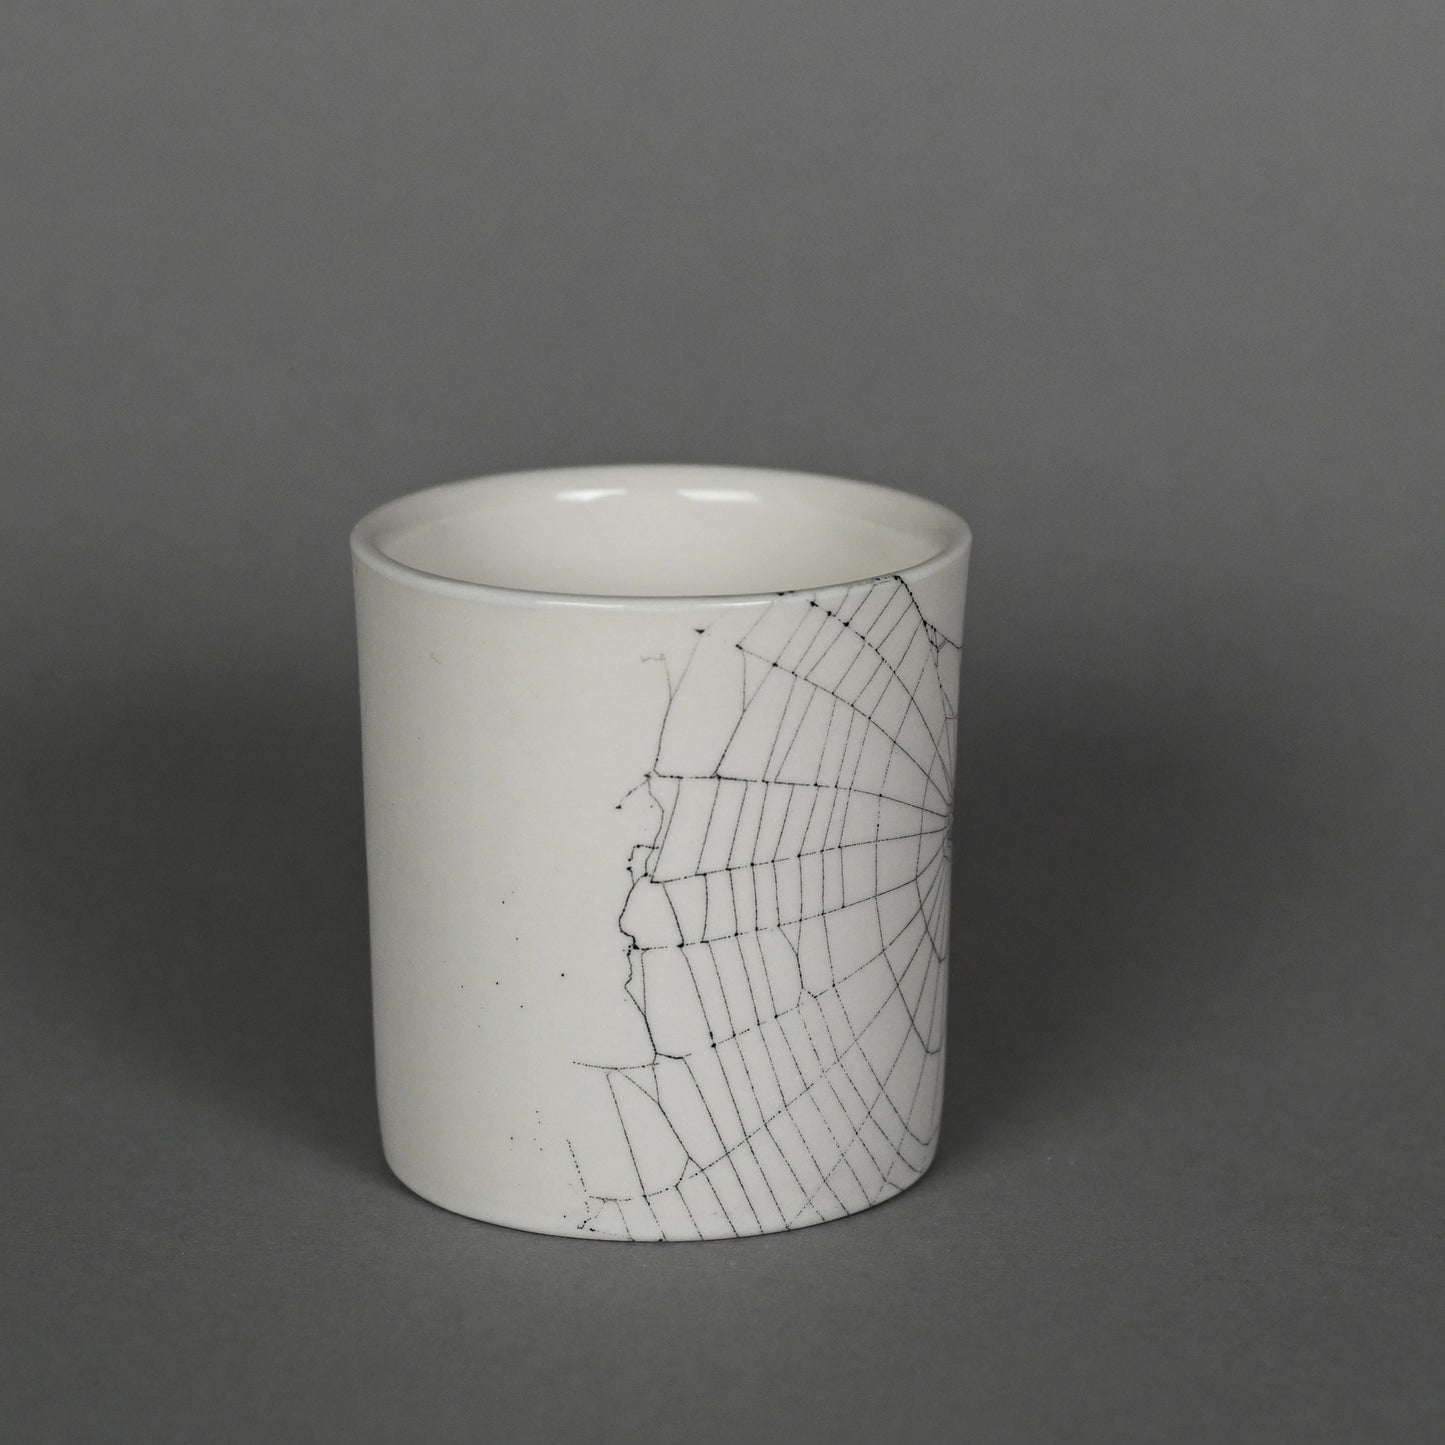 Web on Clay (219), Collected October 03, 2022